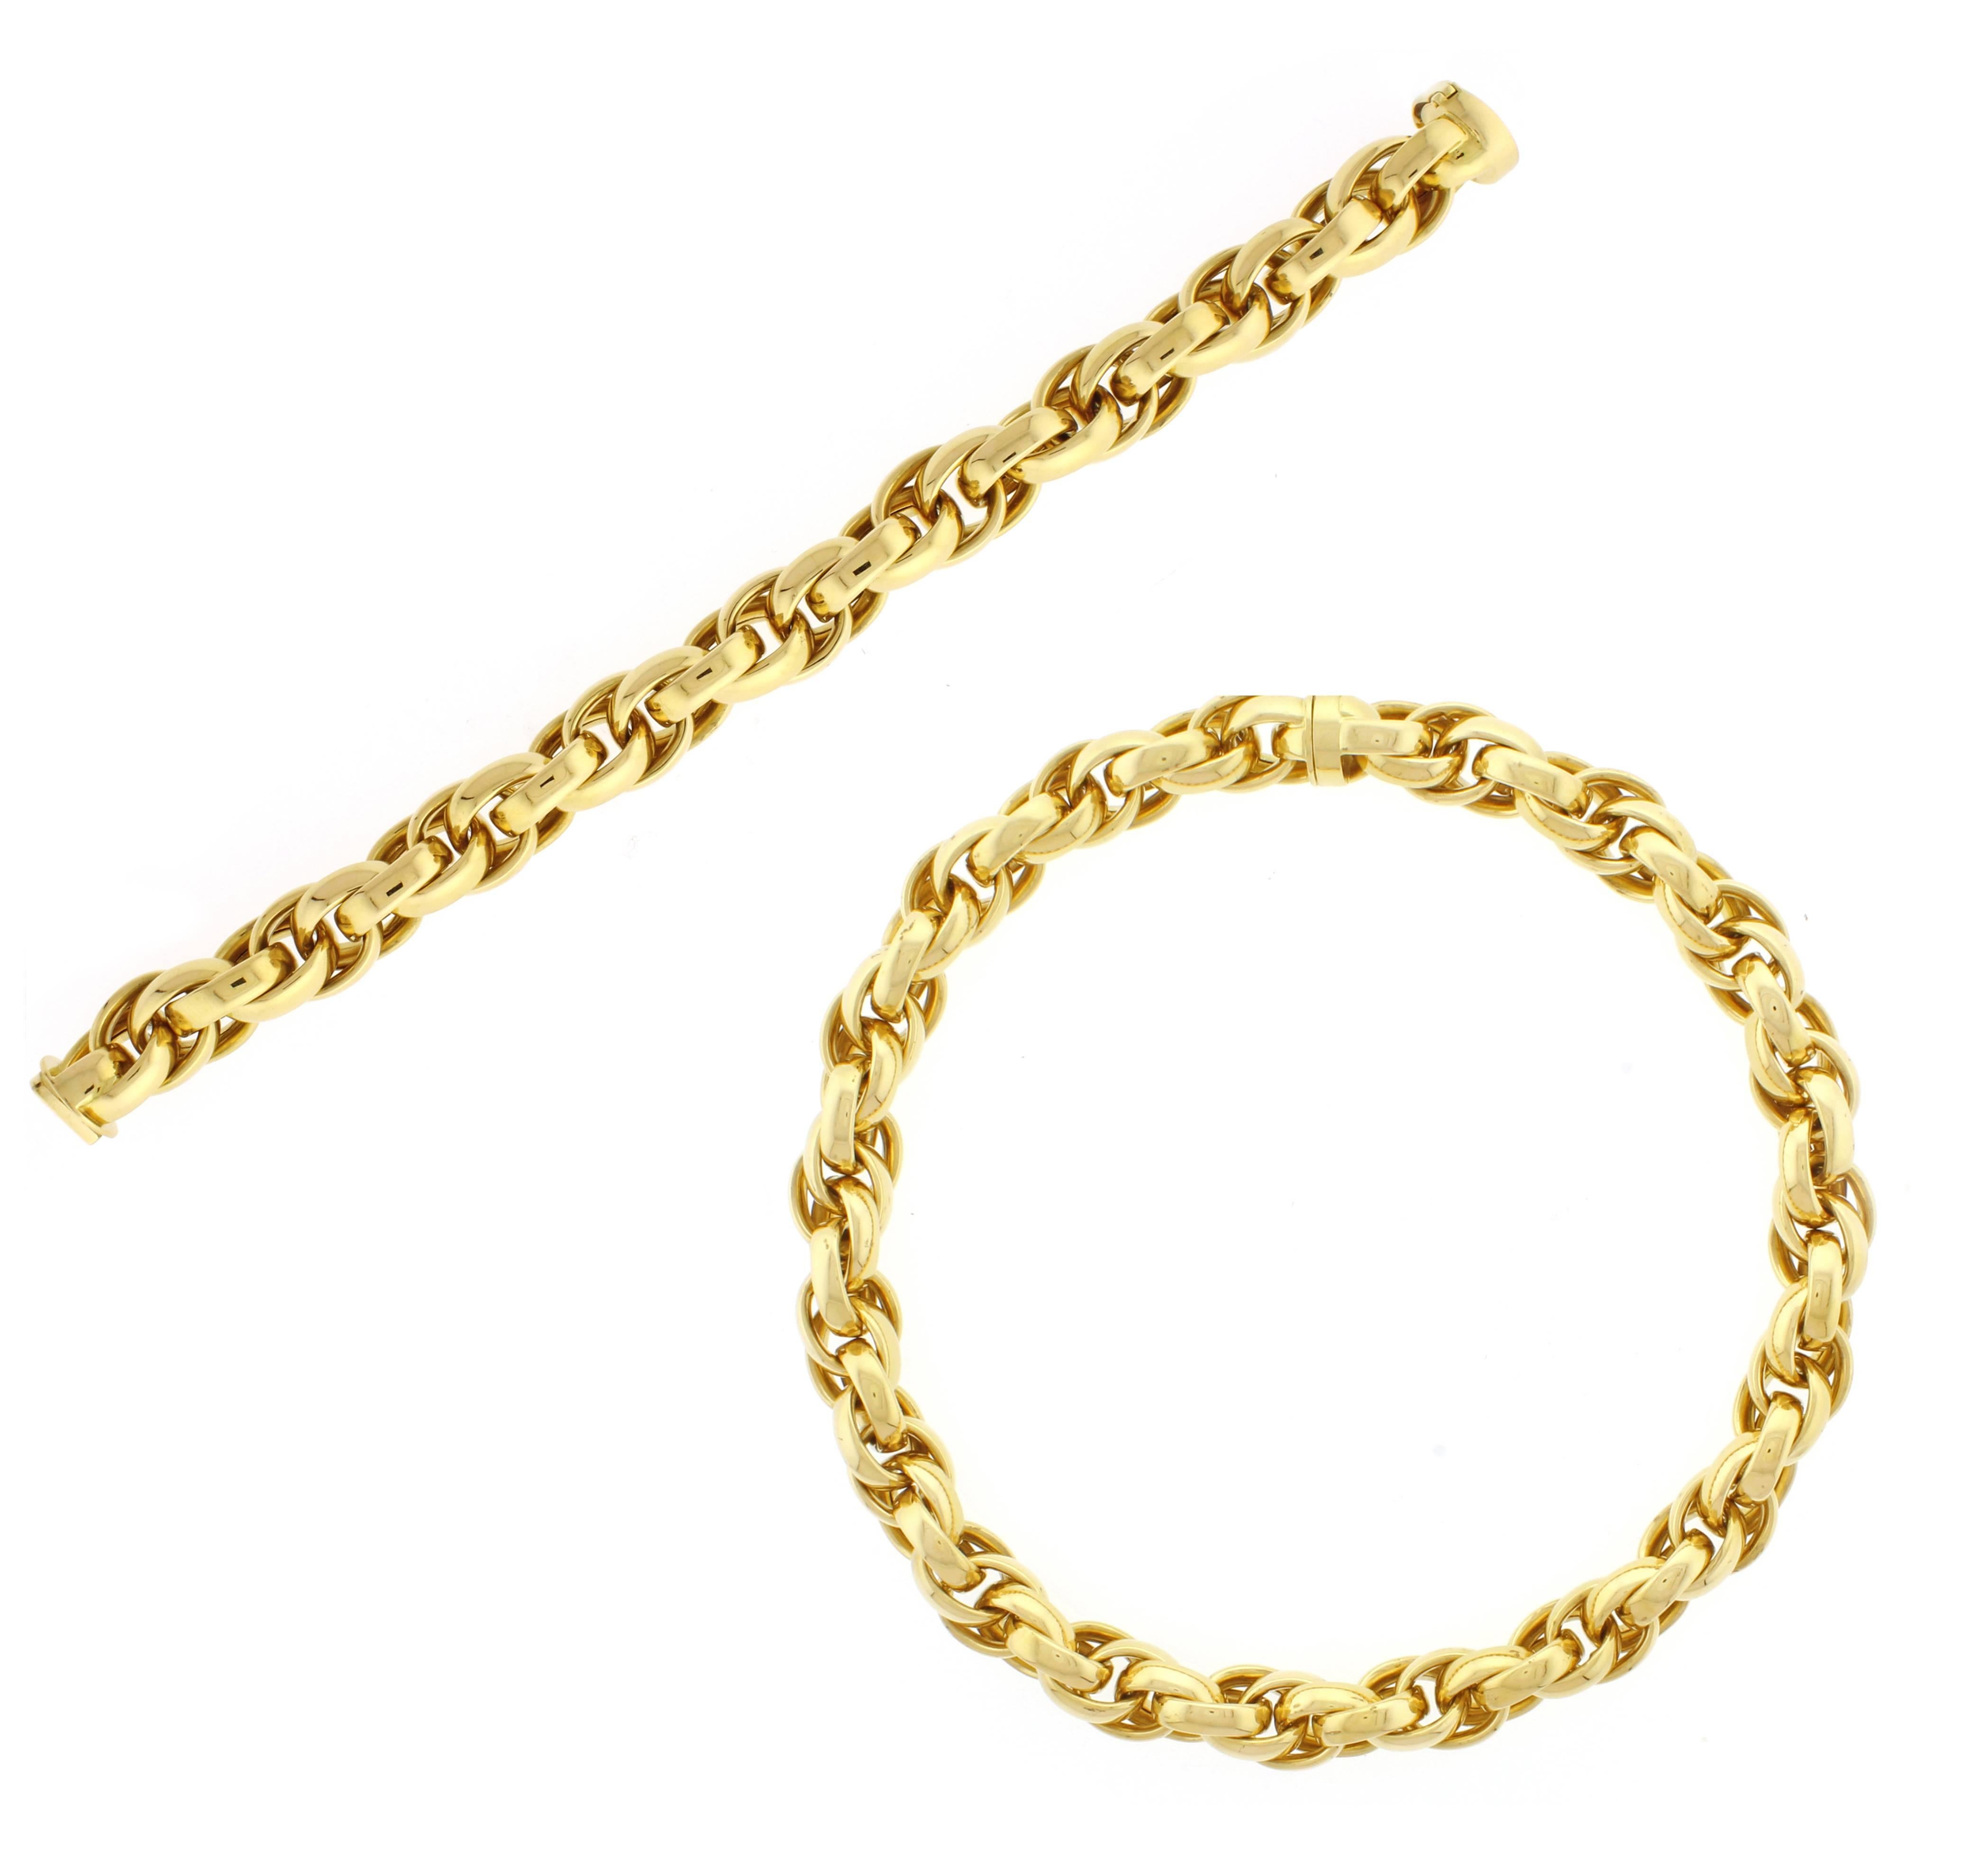 Abel & Zimmerman of Pforzheim, Germany is known for their superb designs and meticulous fabrication, Abel and Zimmerman produced some of the would's finest gold jewelry from 1895 to 2009. This 18 karat  necklace is 1/2 of and inch in diameter and 17